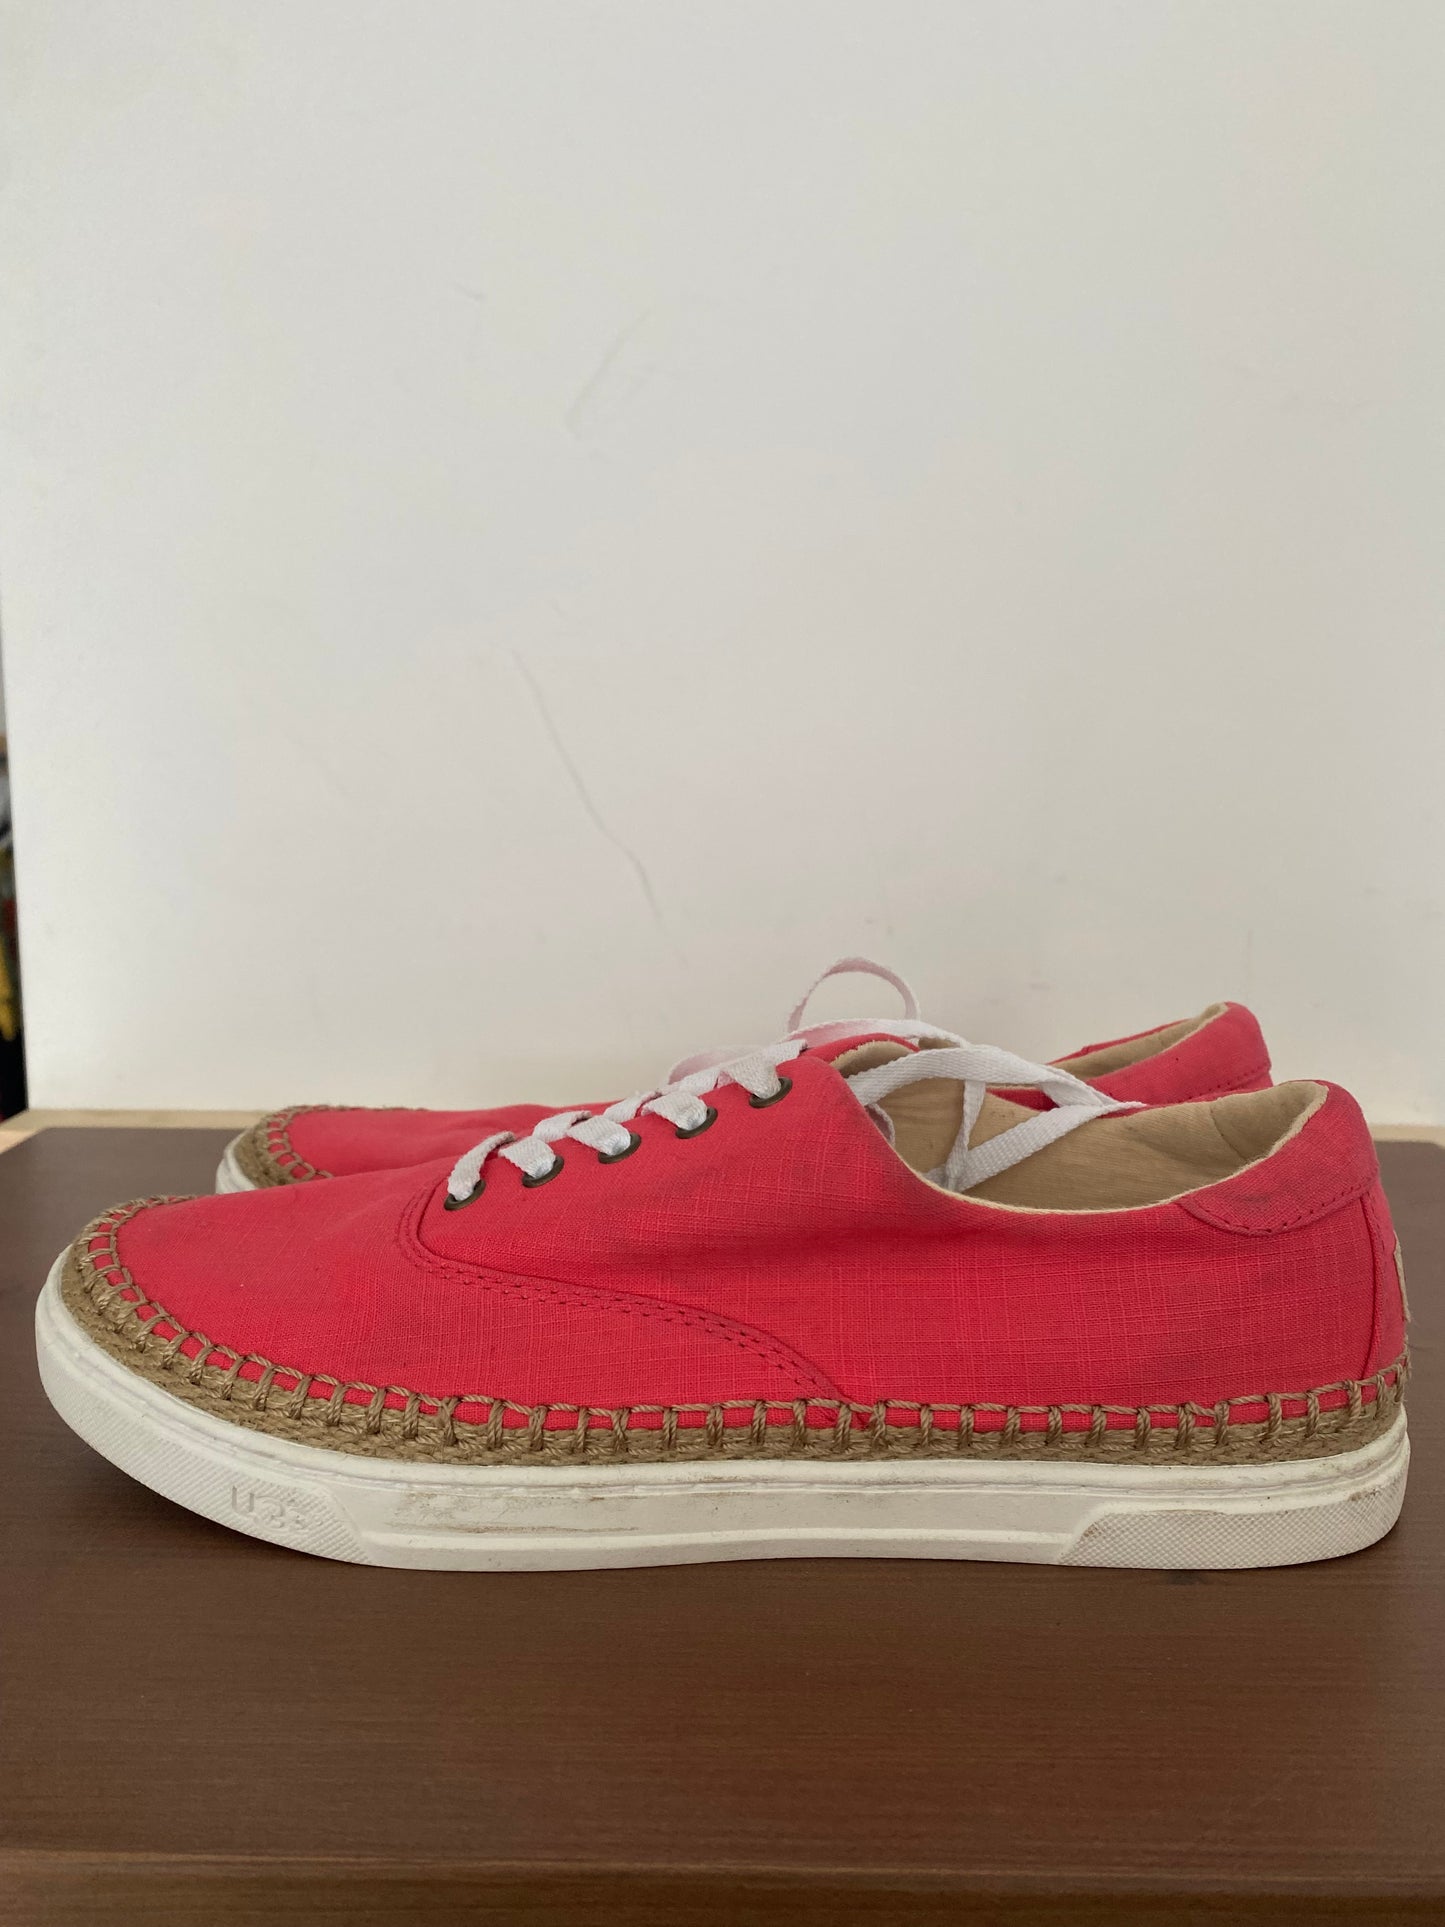 UGG Red Espadrille Canvas Shoes Size 7.5